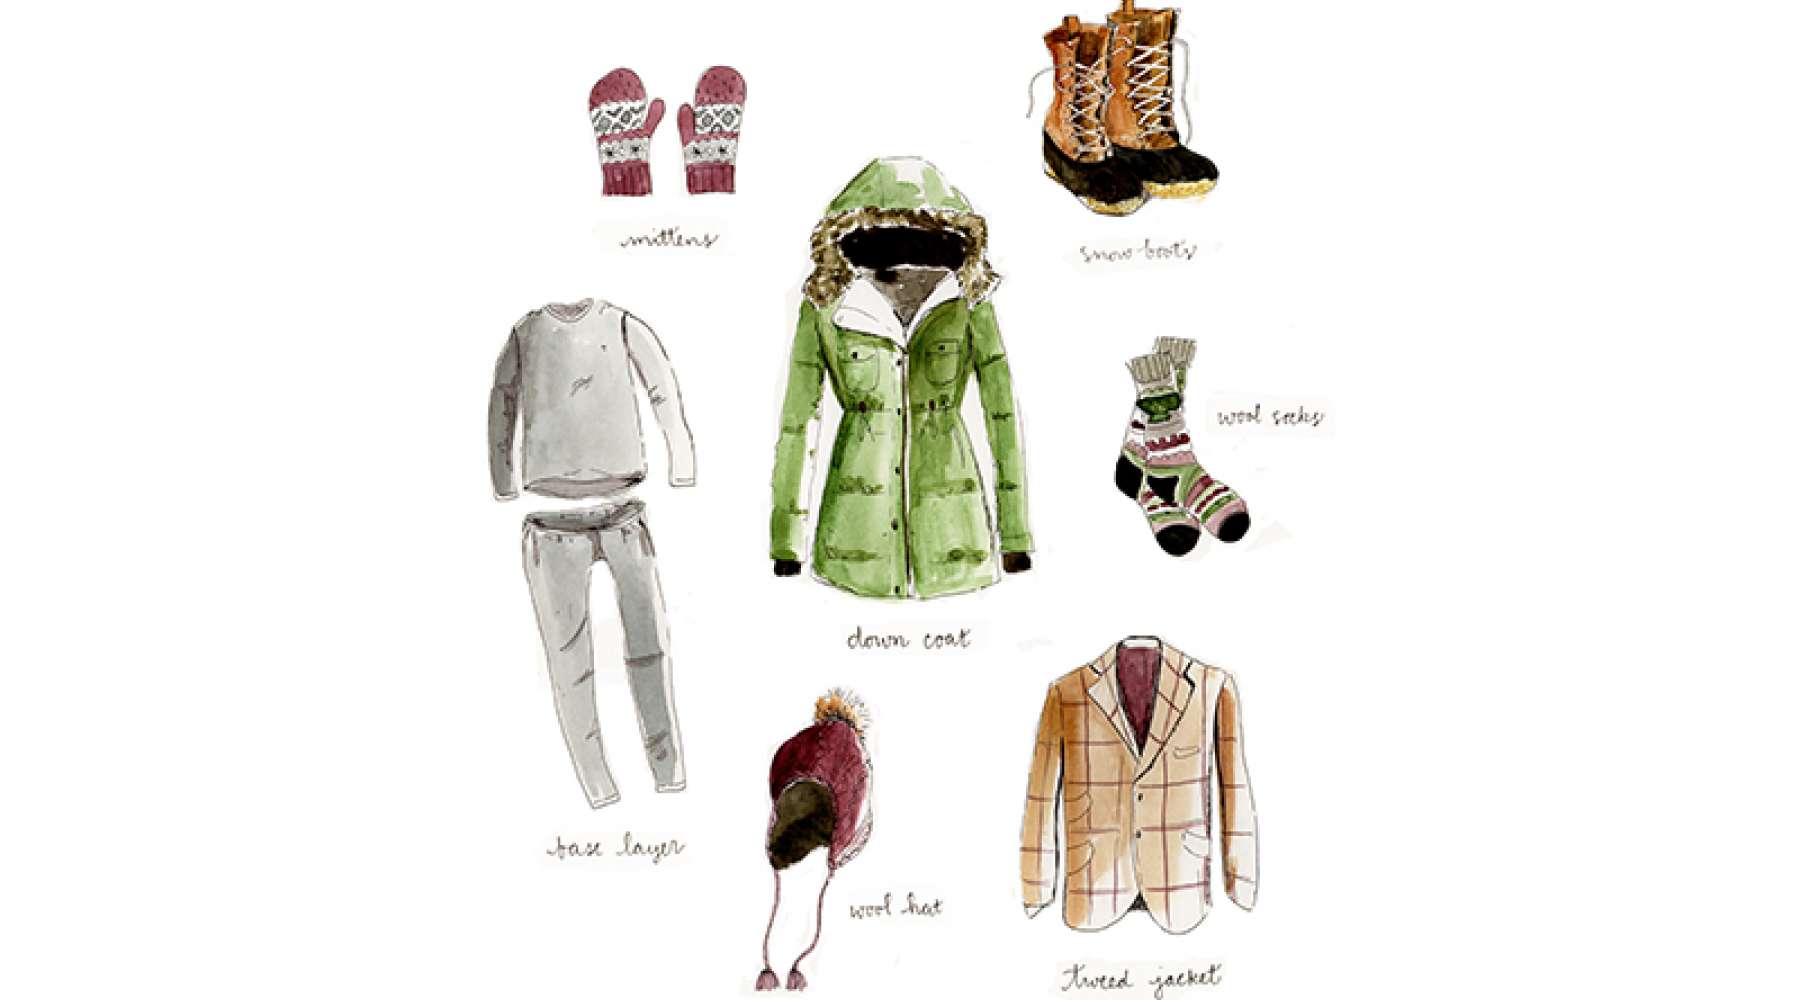 https://www.tuck.dartmouth.edu/images/made/uploads/blog_images/winterclothes_1800_1000_60_s_c1.jpg